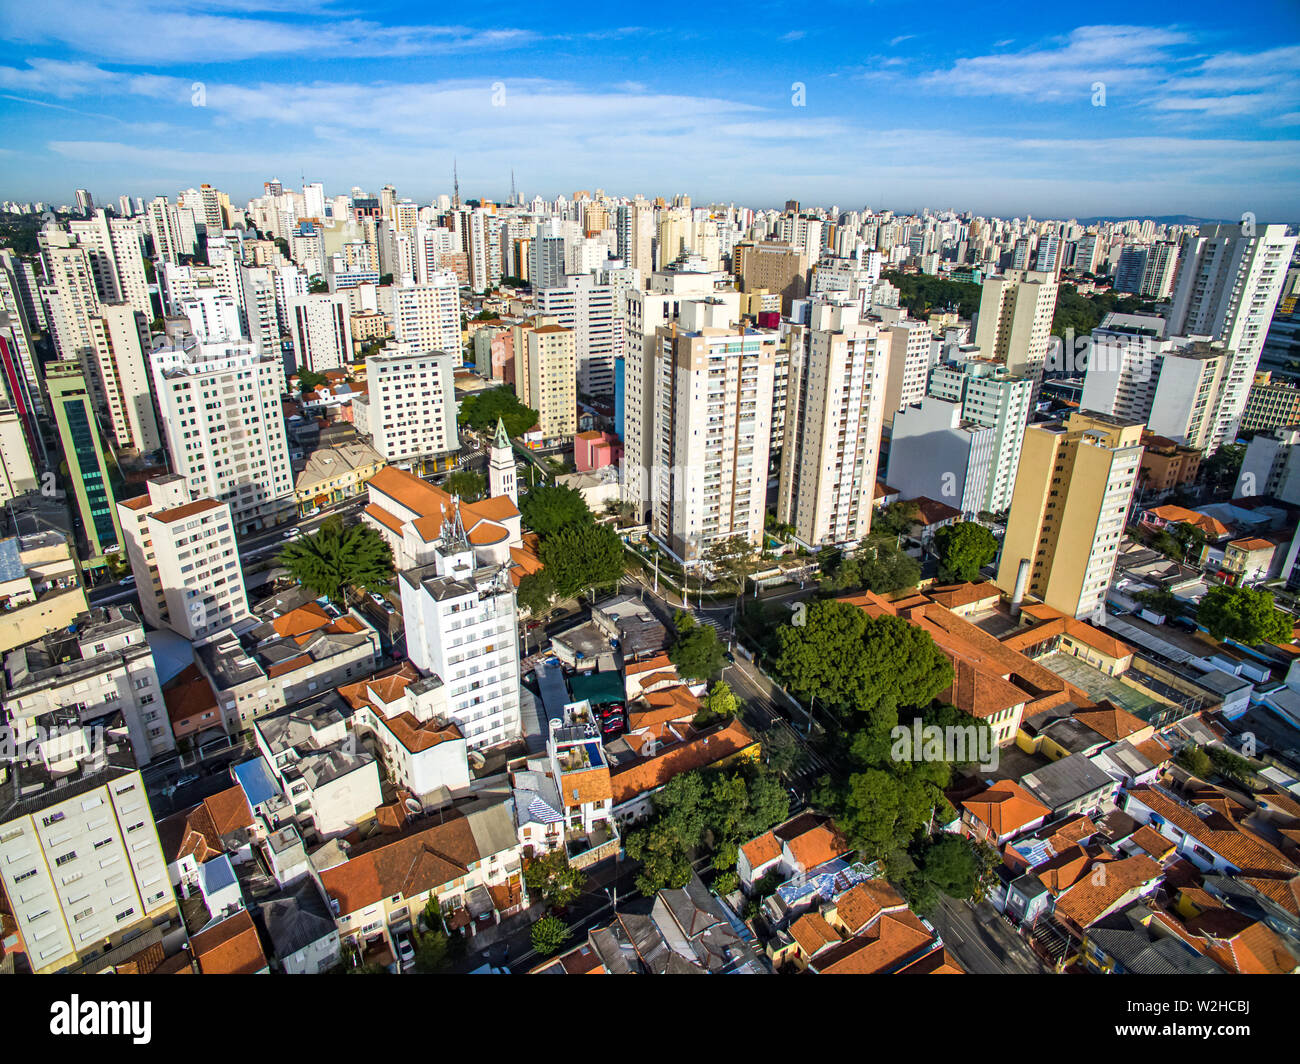 Aerial view of city. Stock Photo